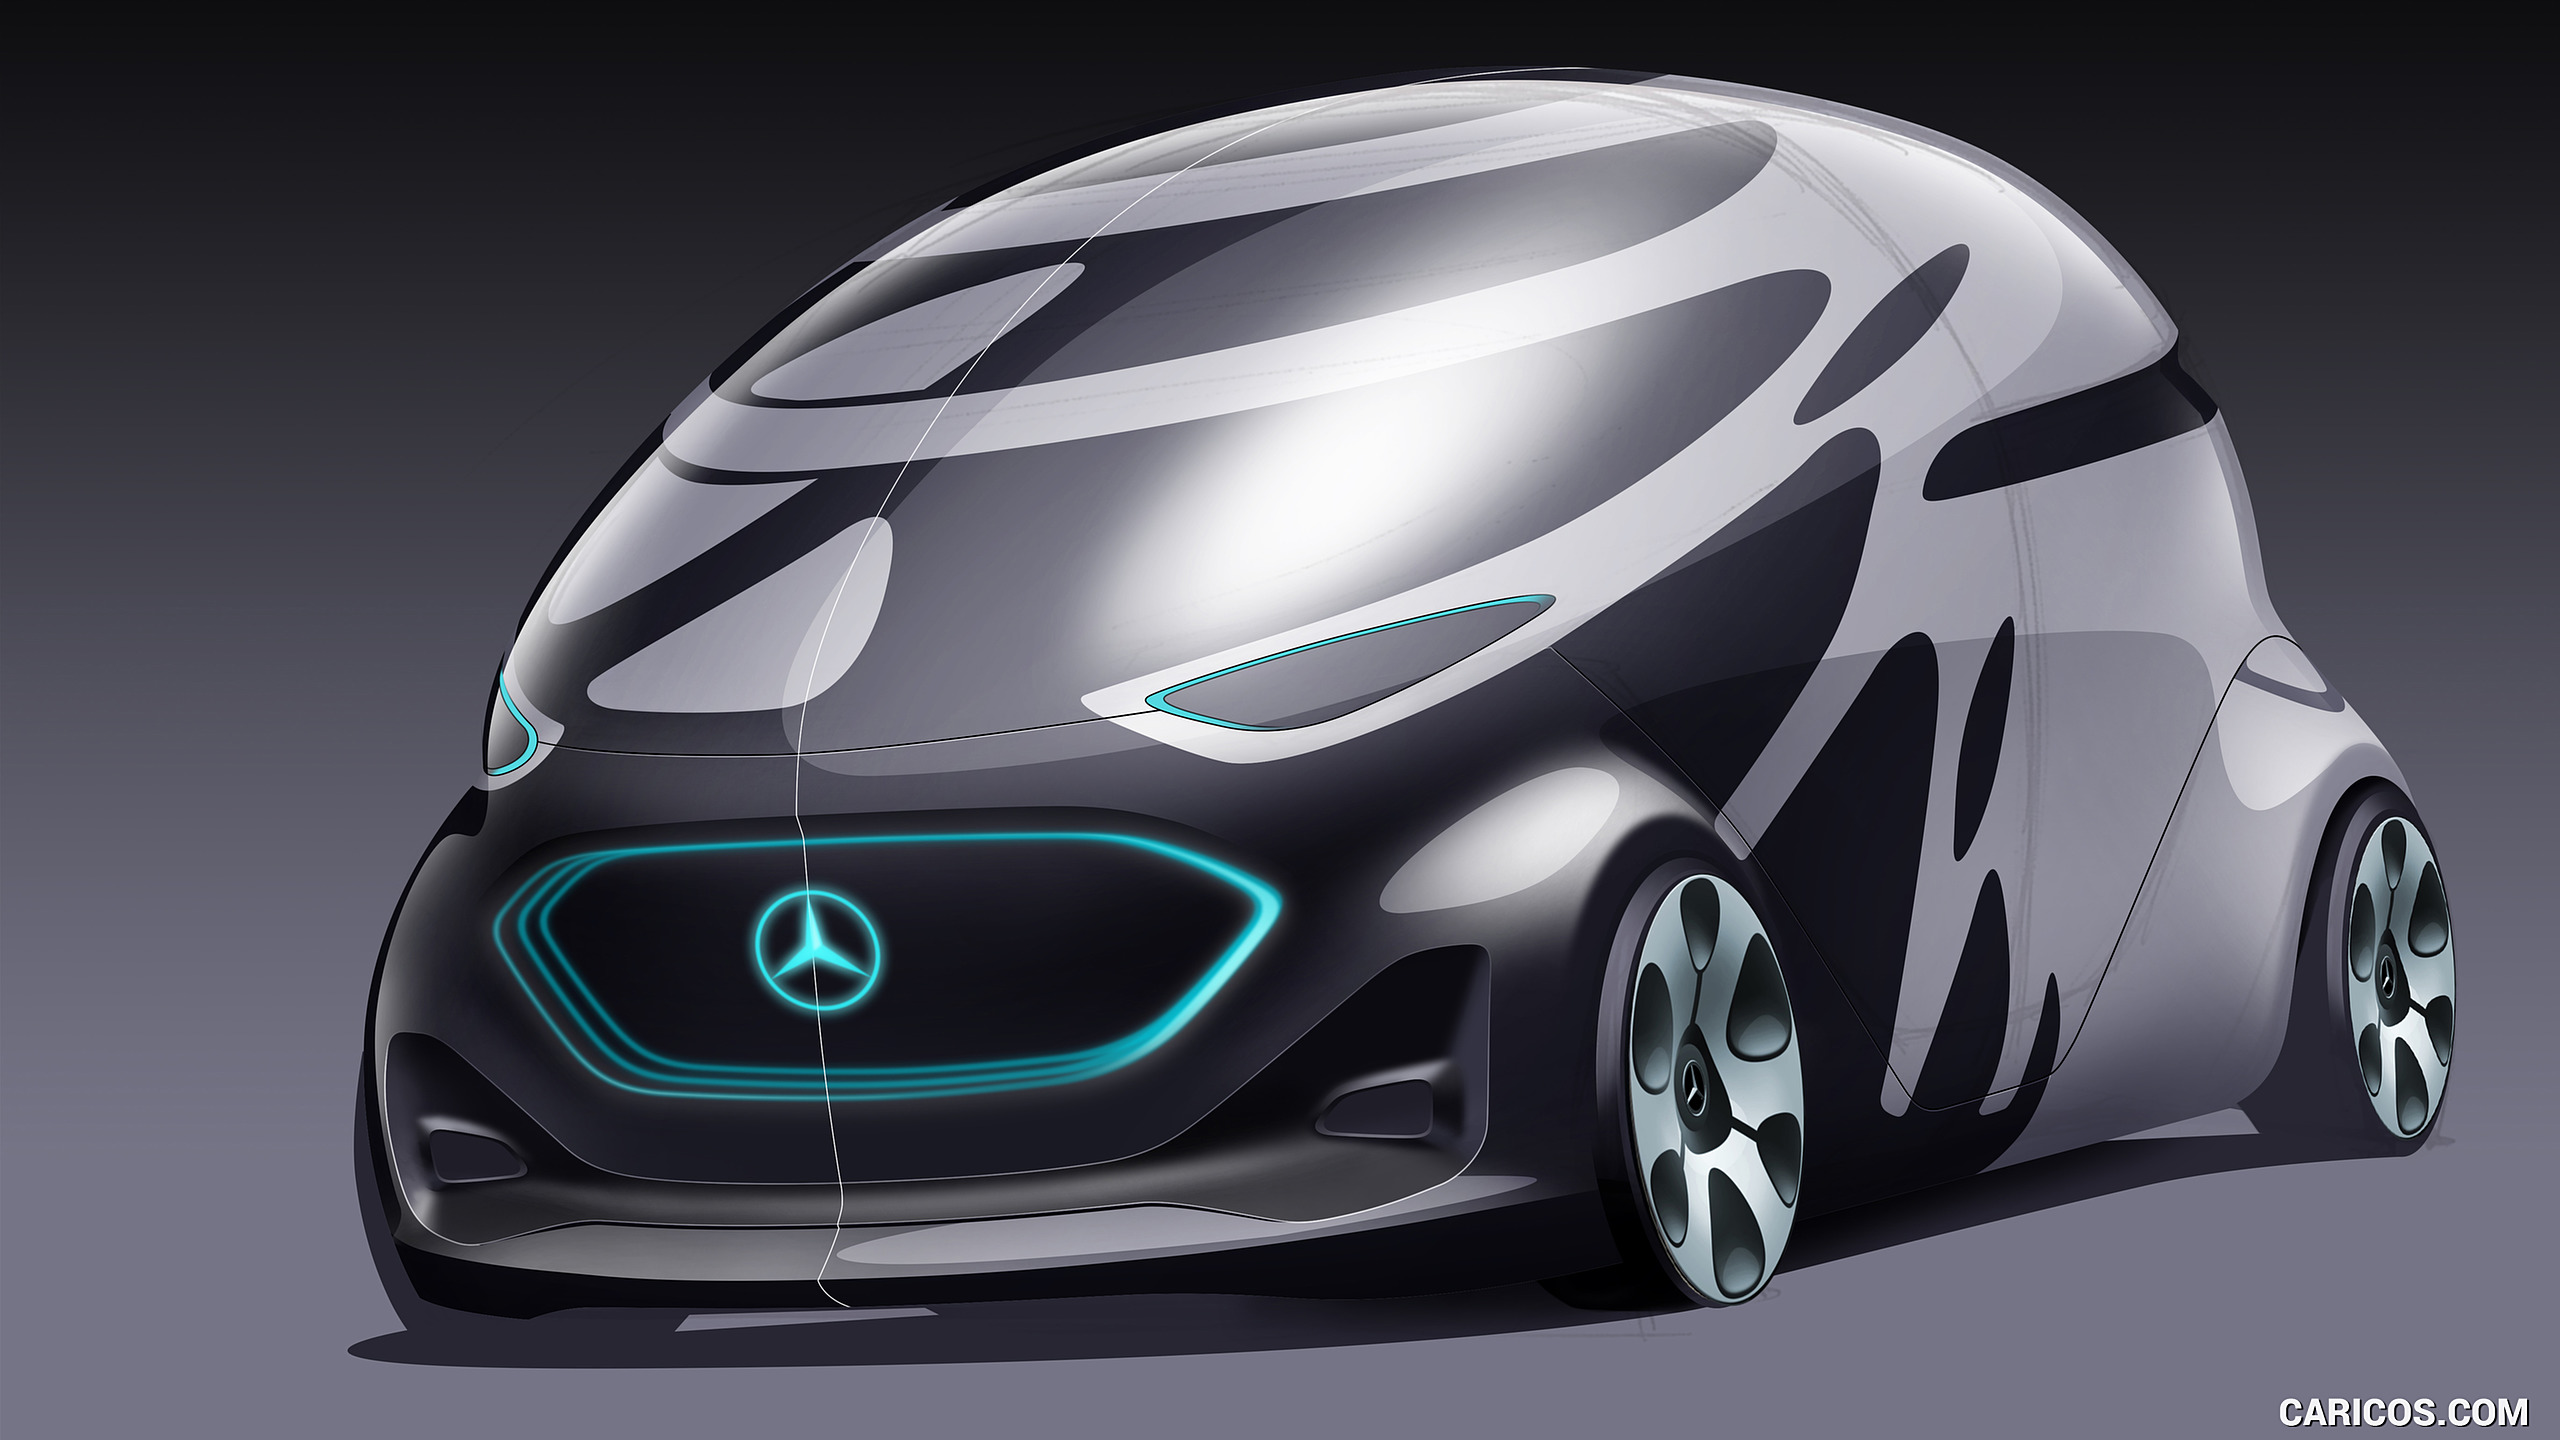 2018 Mercedes-Benz Vision URBANETIC Concept - Front, #8 of 14